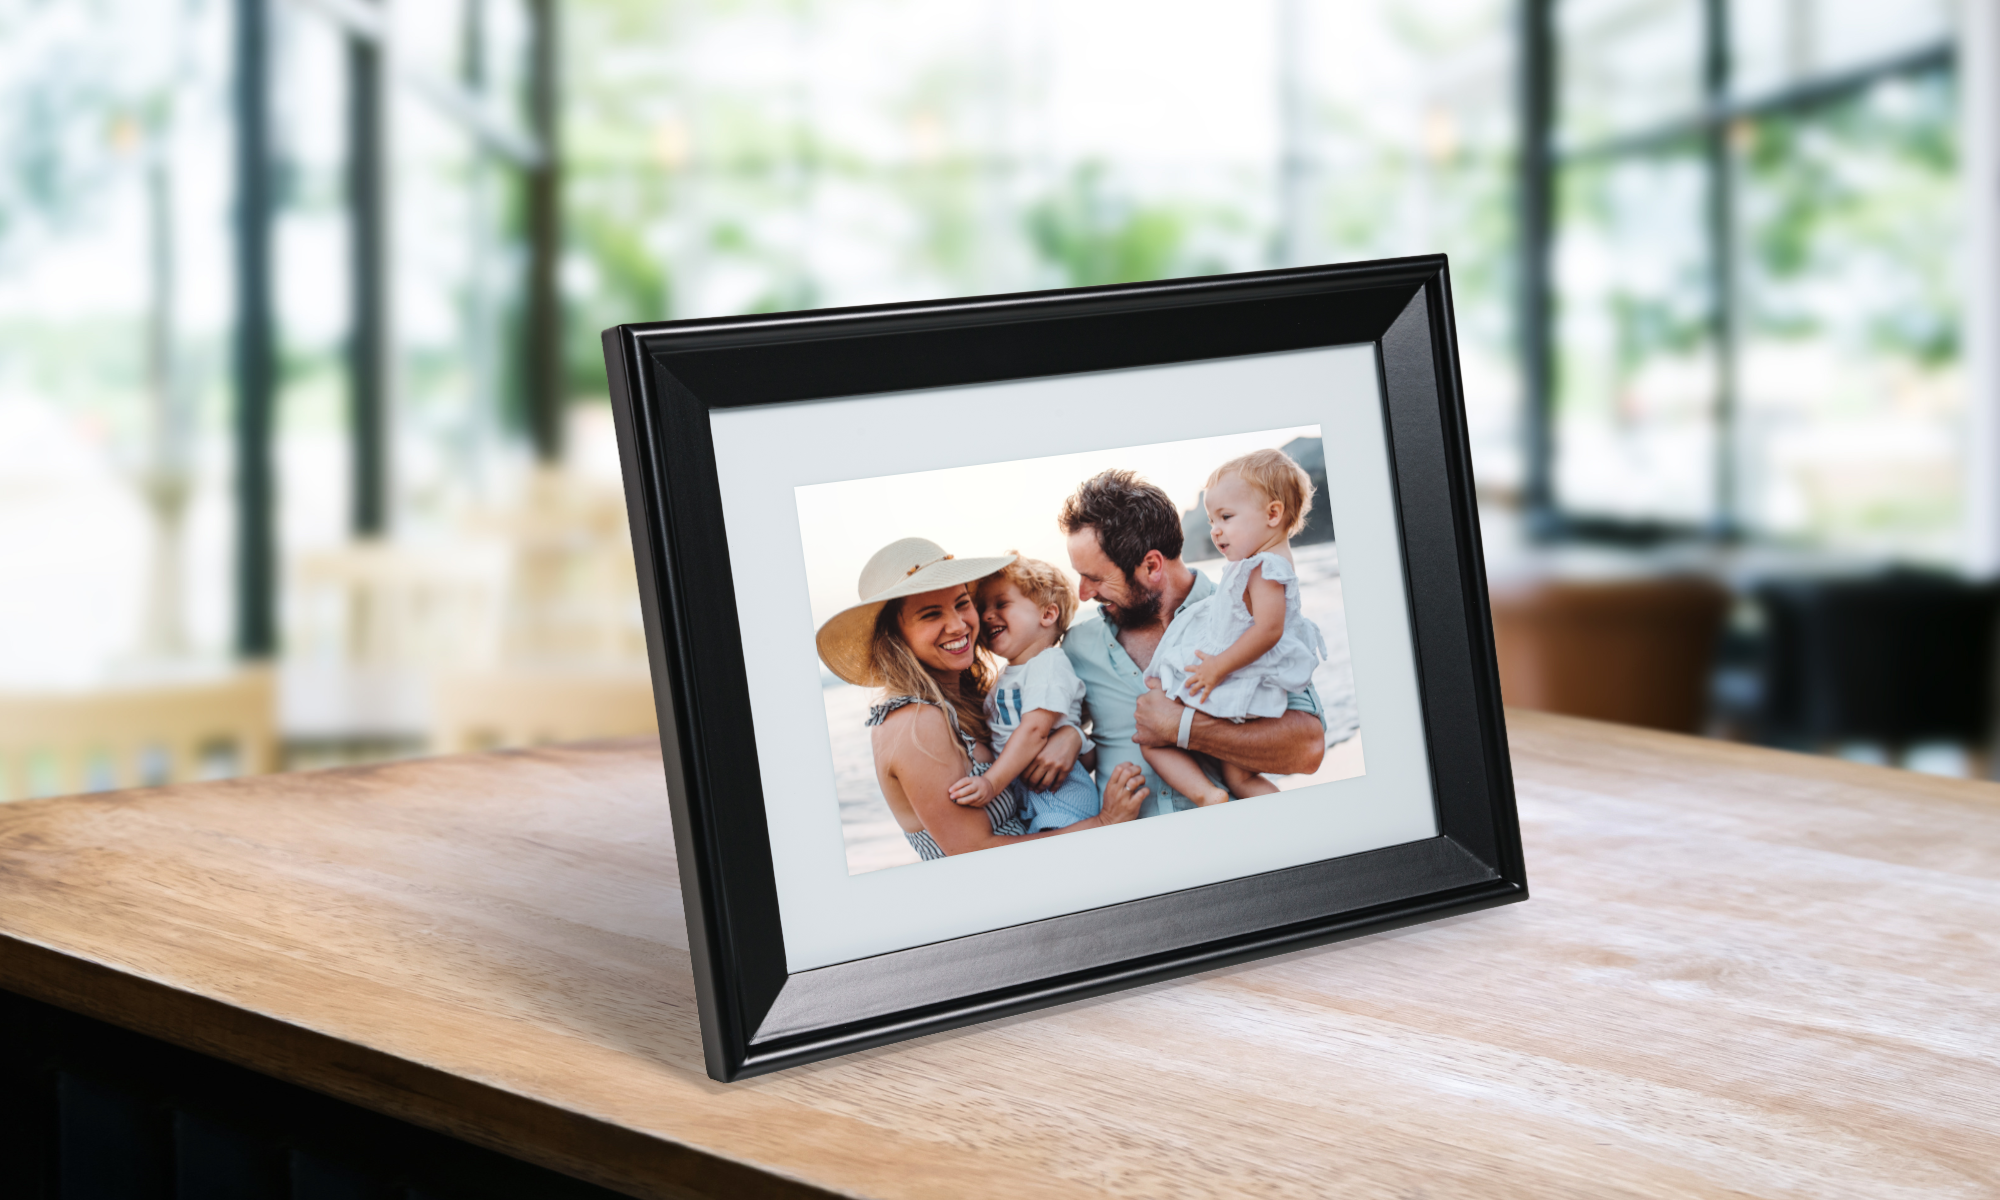 A black digital frame with a family of 4 looking at each other and smiling